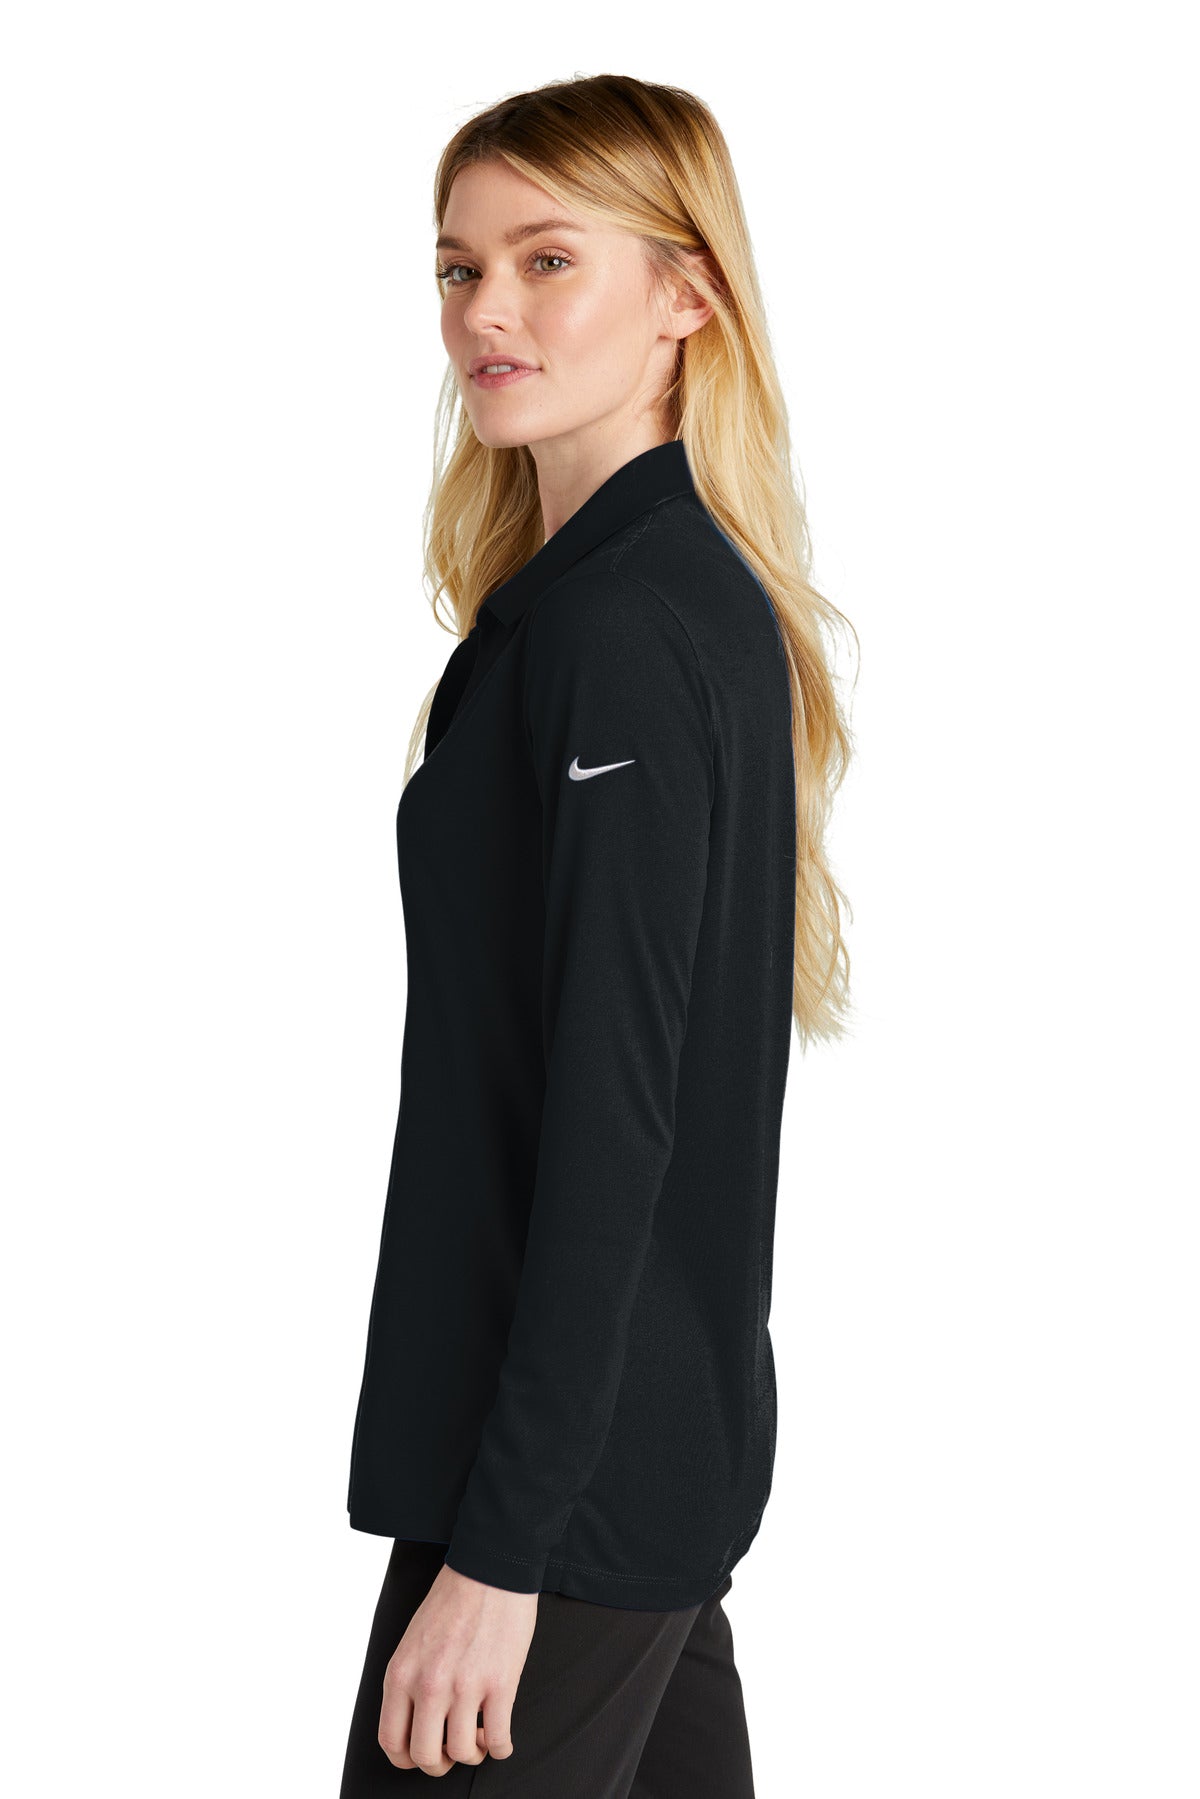 Swaasi Core - Nike® LADIES LONG-SLEEVE Dri-FIT Micro Pique 2.0 Polo with EMB Logo